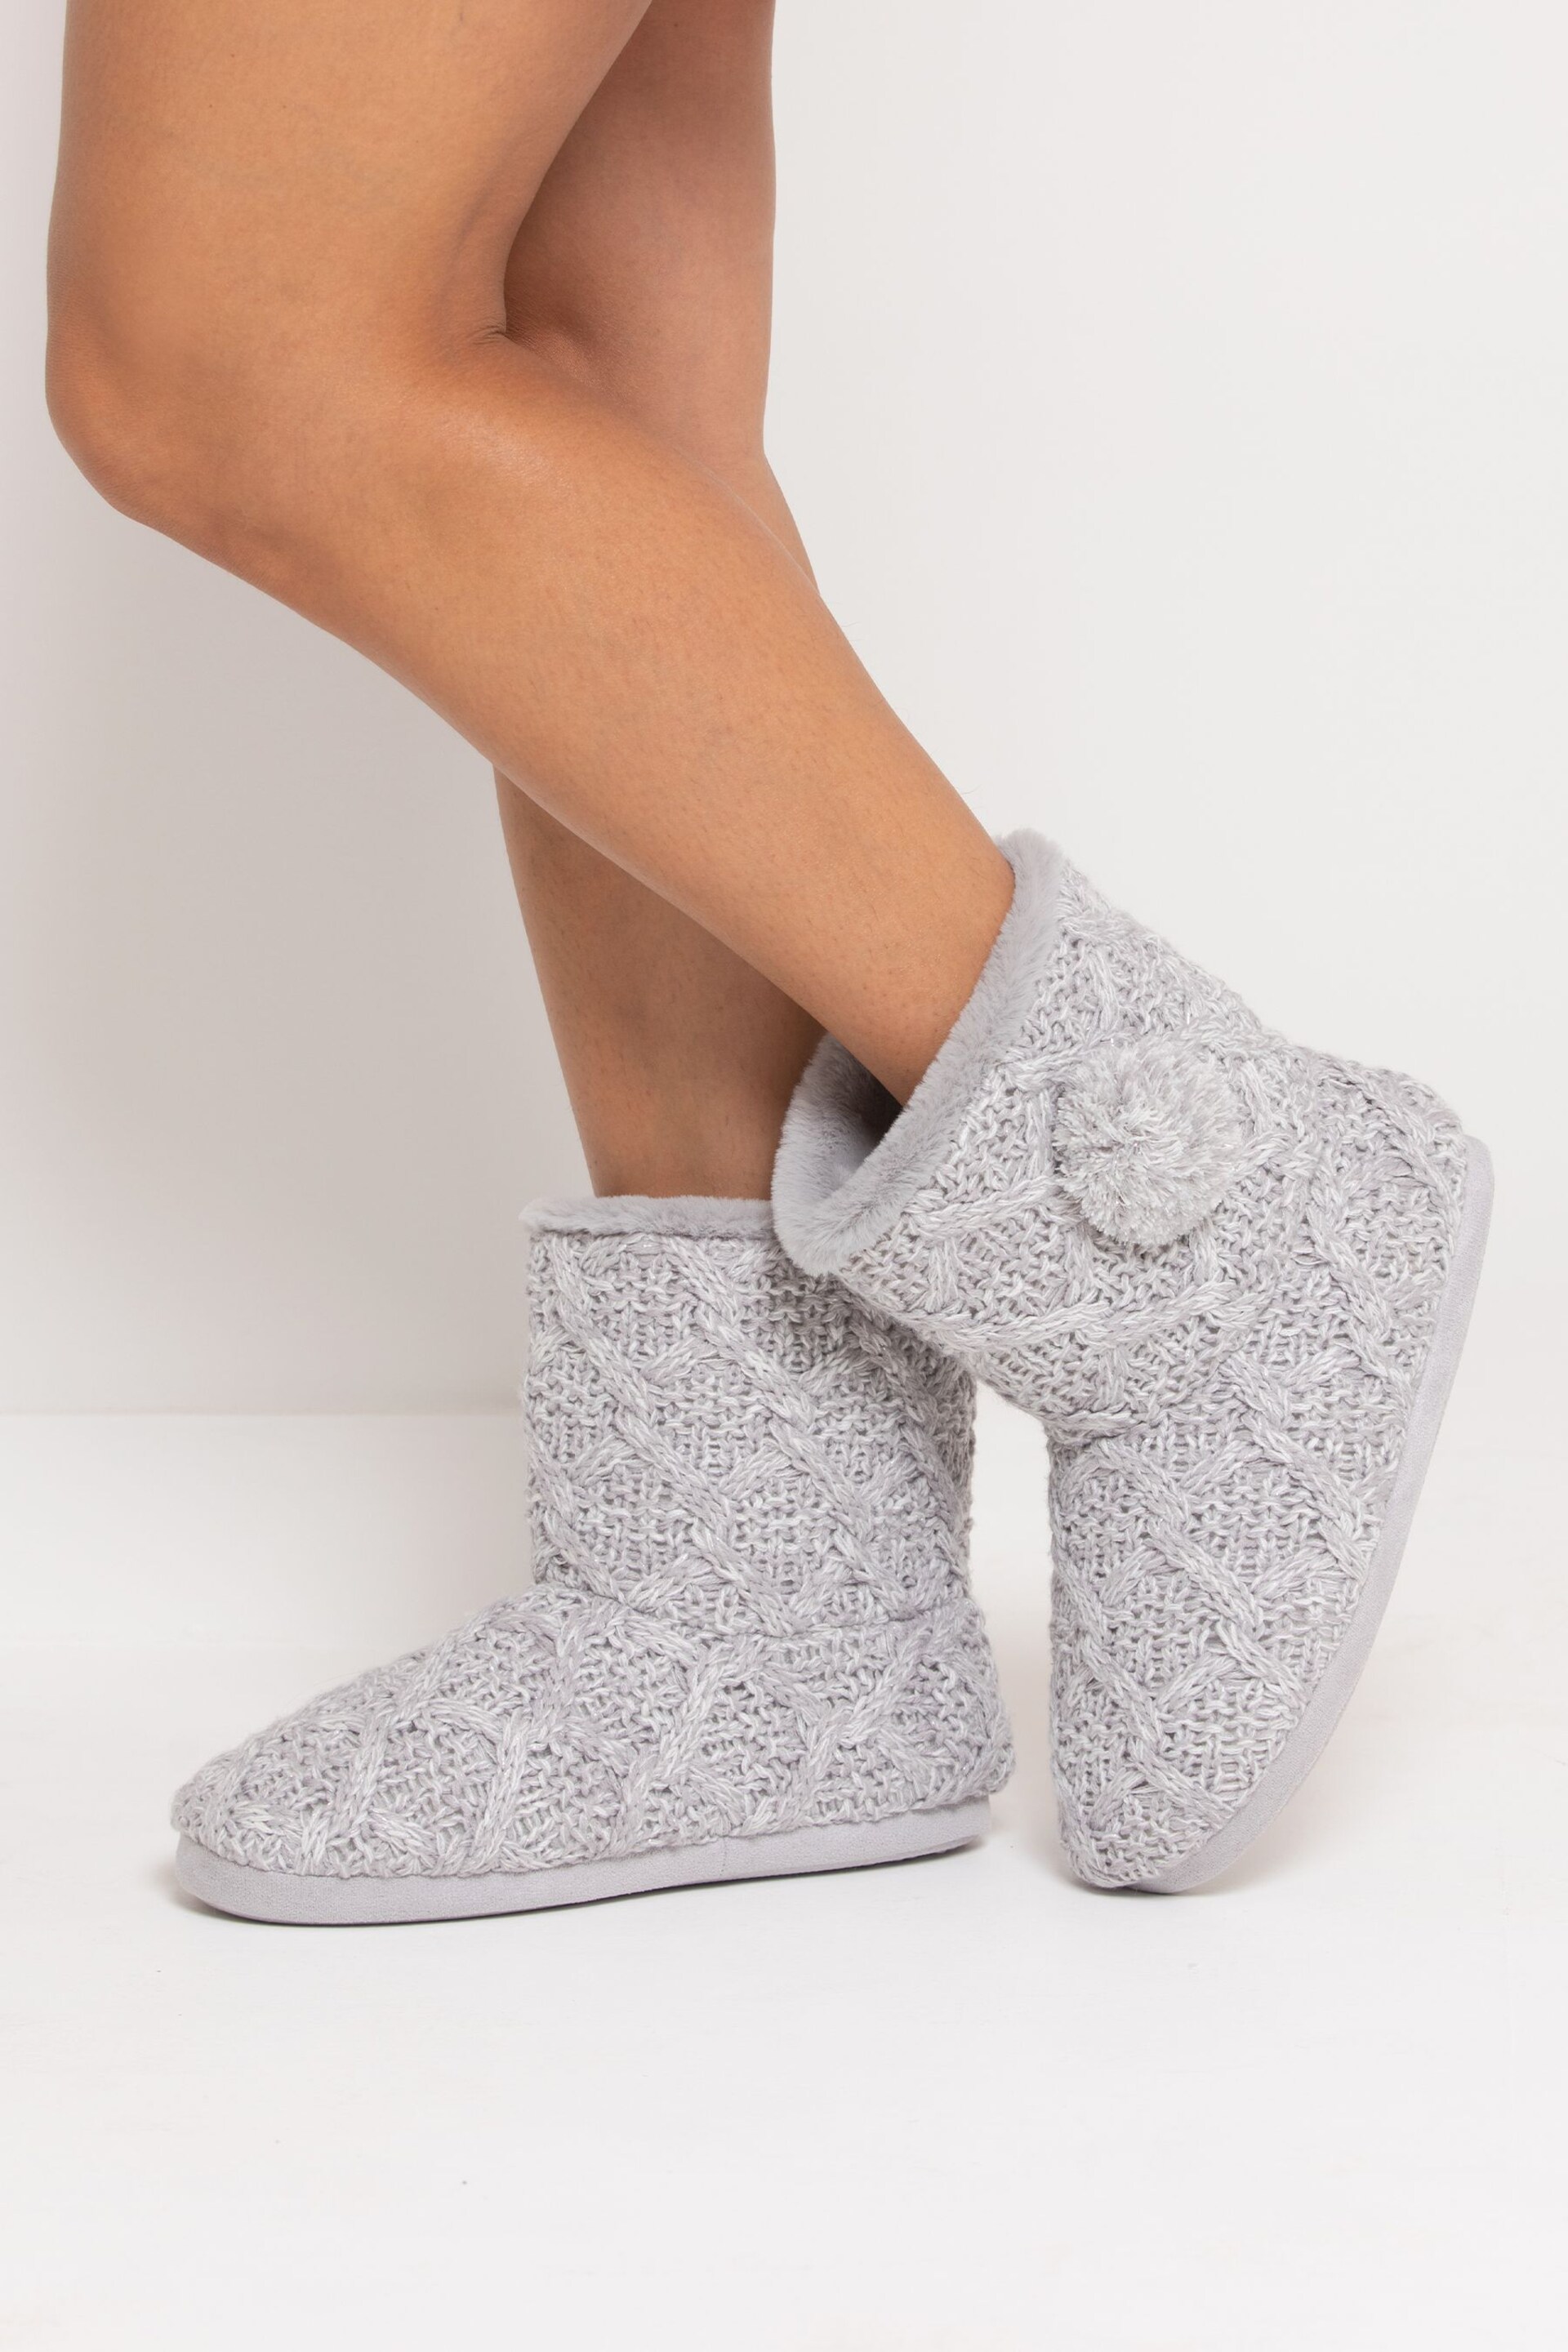 Pour Moi Grey Cable Knit Faux Fur Lined Bootie Slippers - Image 1 of 3